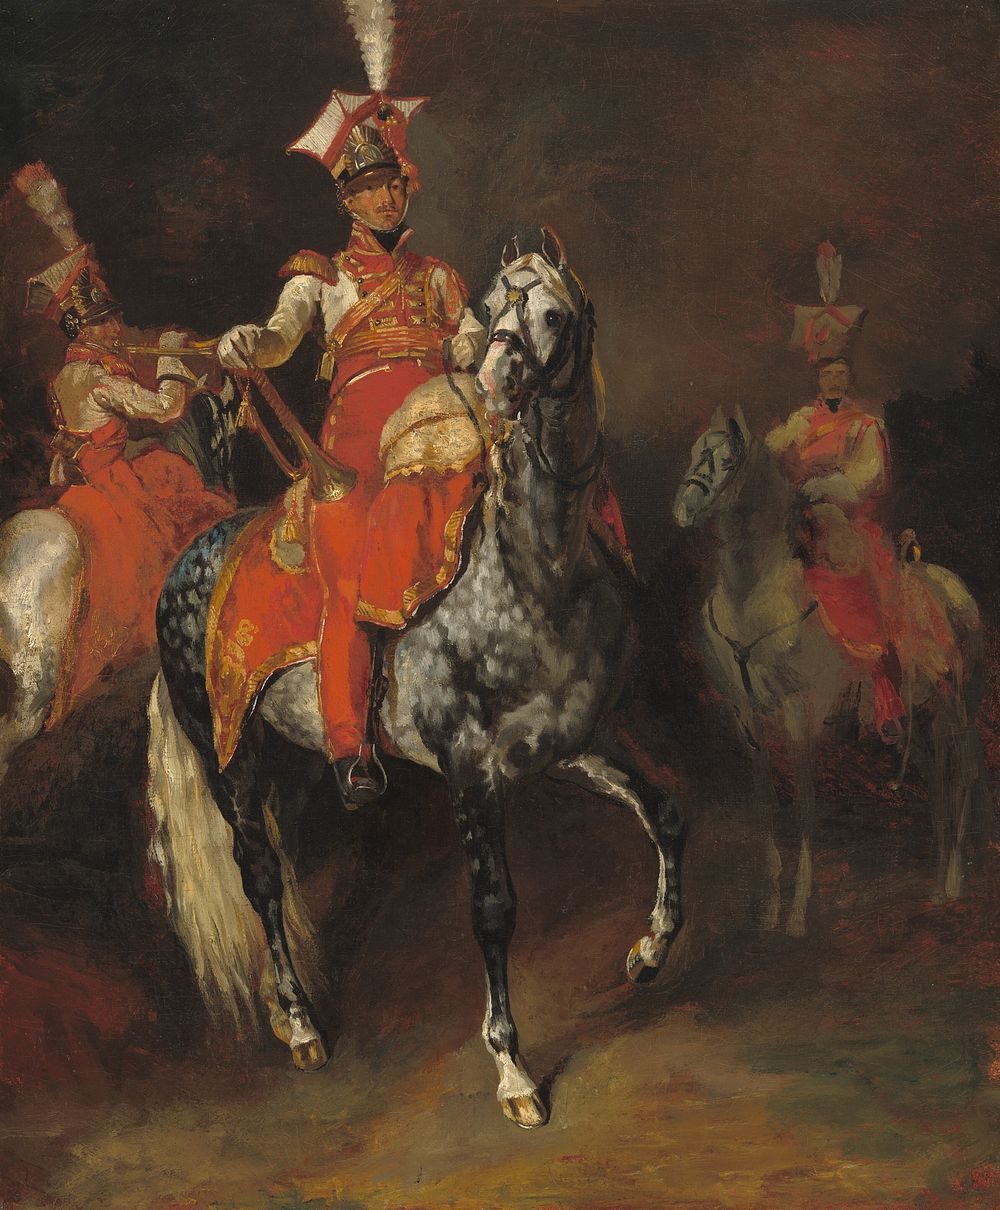 Mounted Trumpeters of Napoleon's Imperial Guard (1813&ndash;1814) by Th&eacute;odore Gericault.  